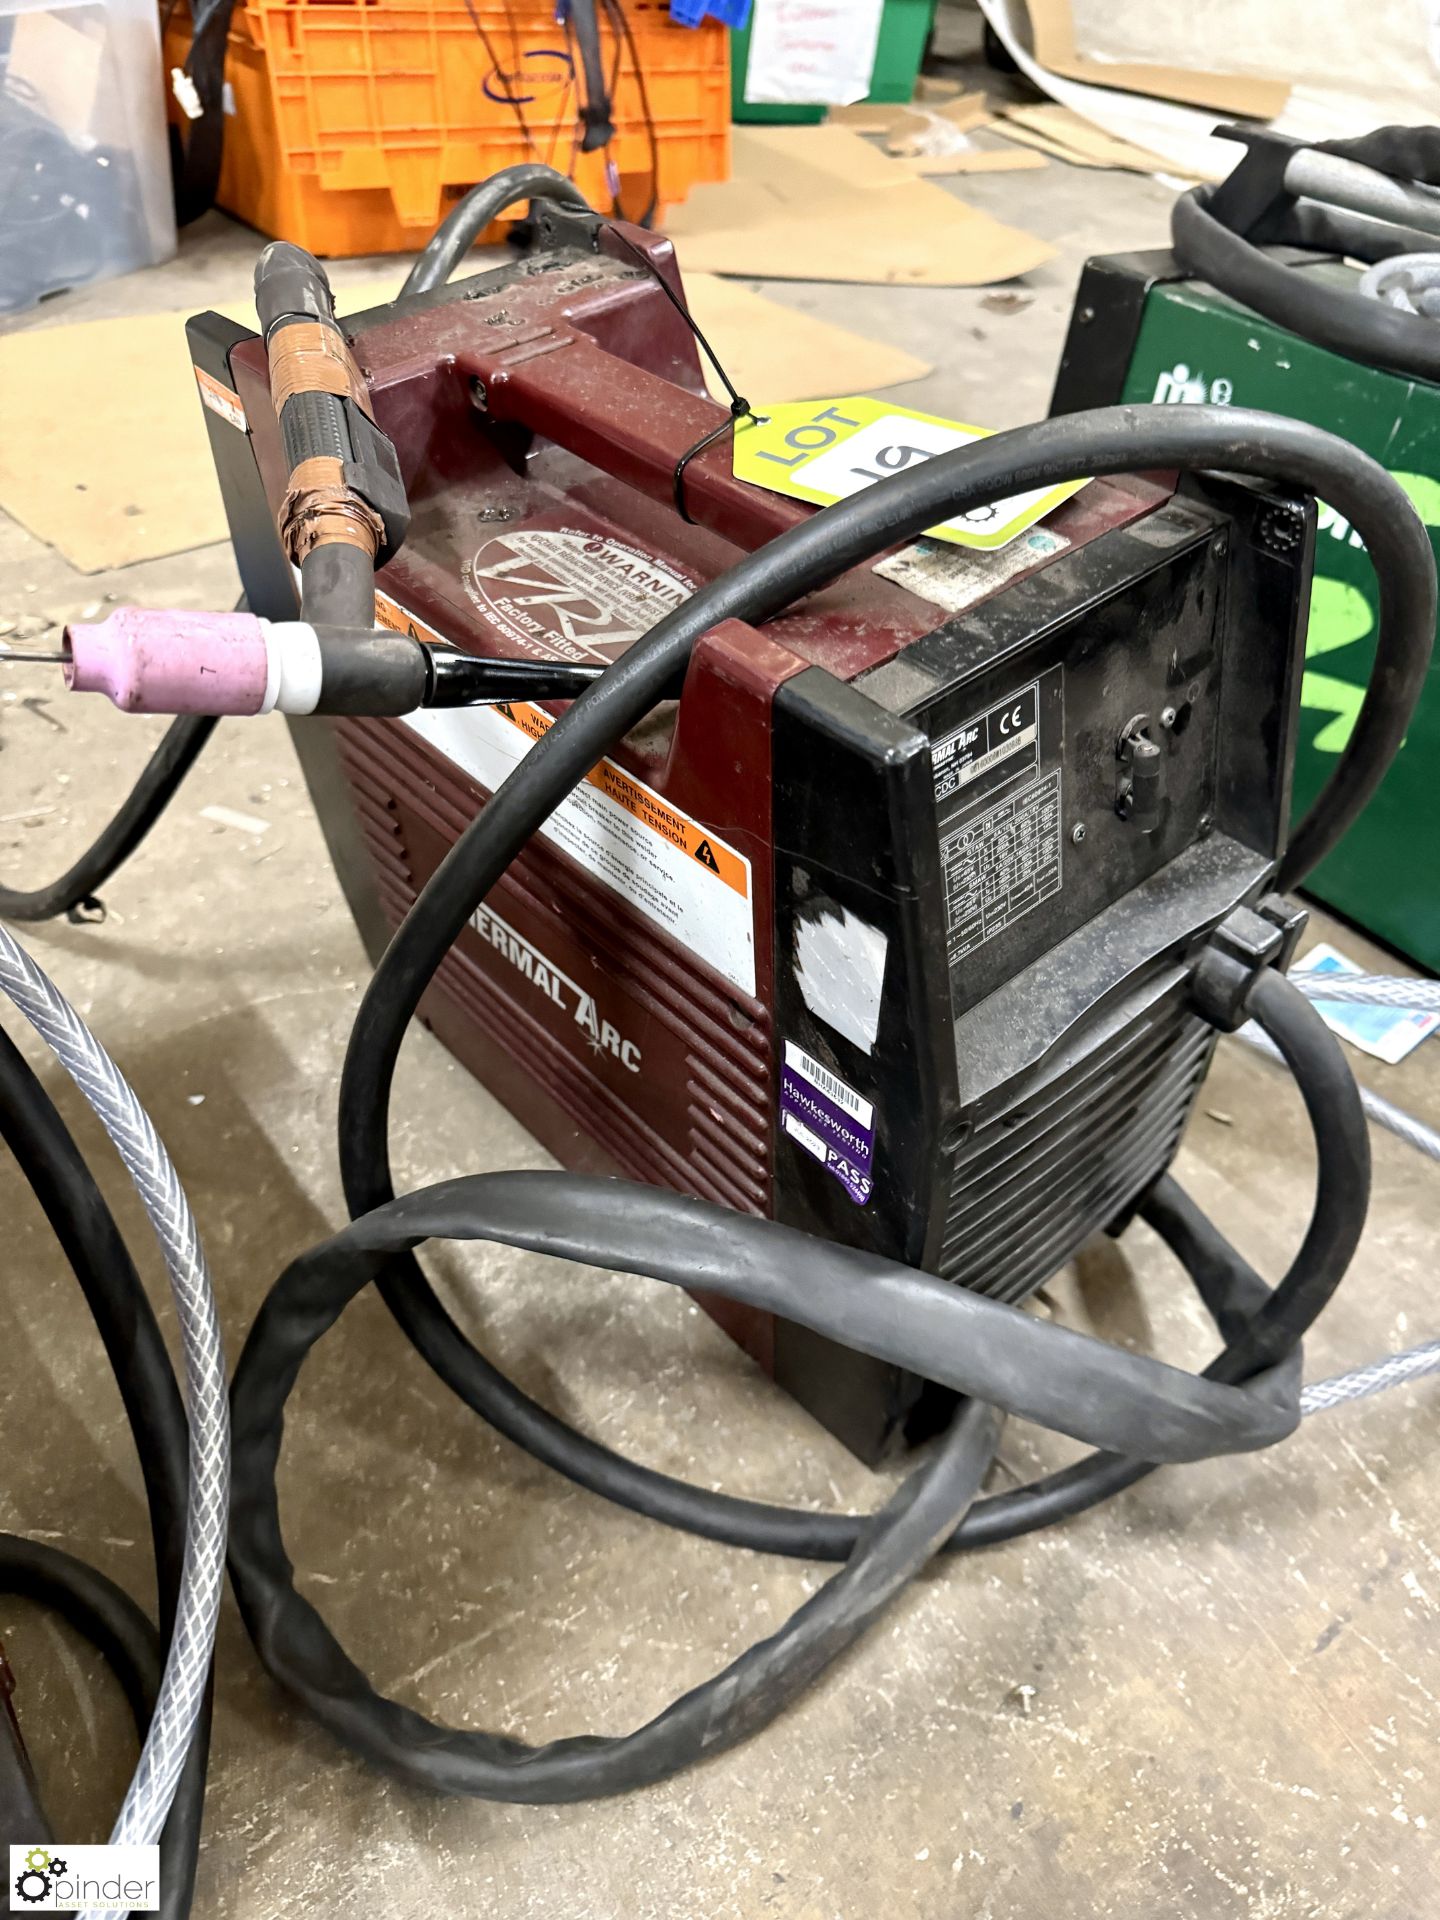 Thermal Arc 200 AC/DC Tig Welding Set, 240volts, 32amps - Image 2 of 6